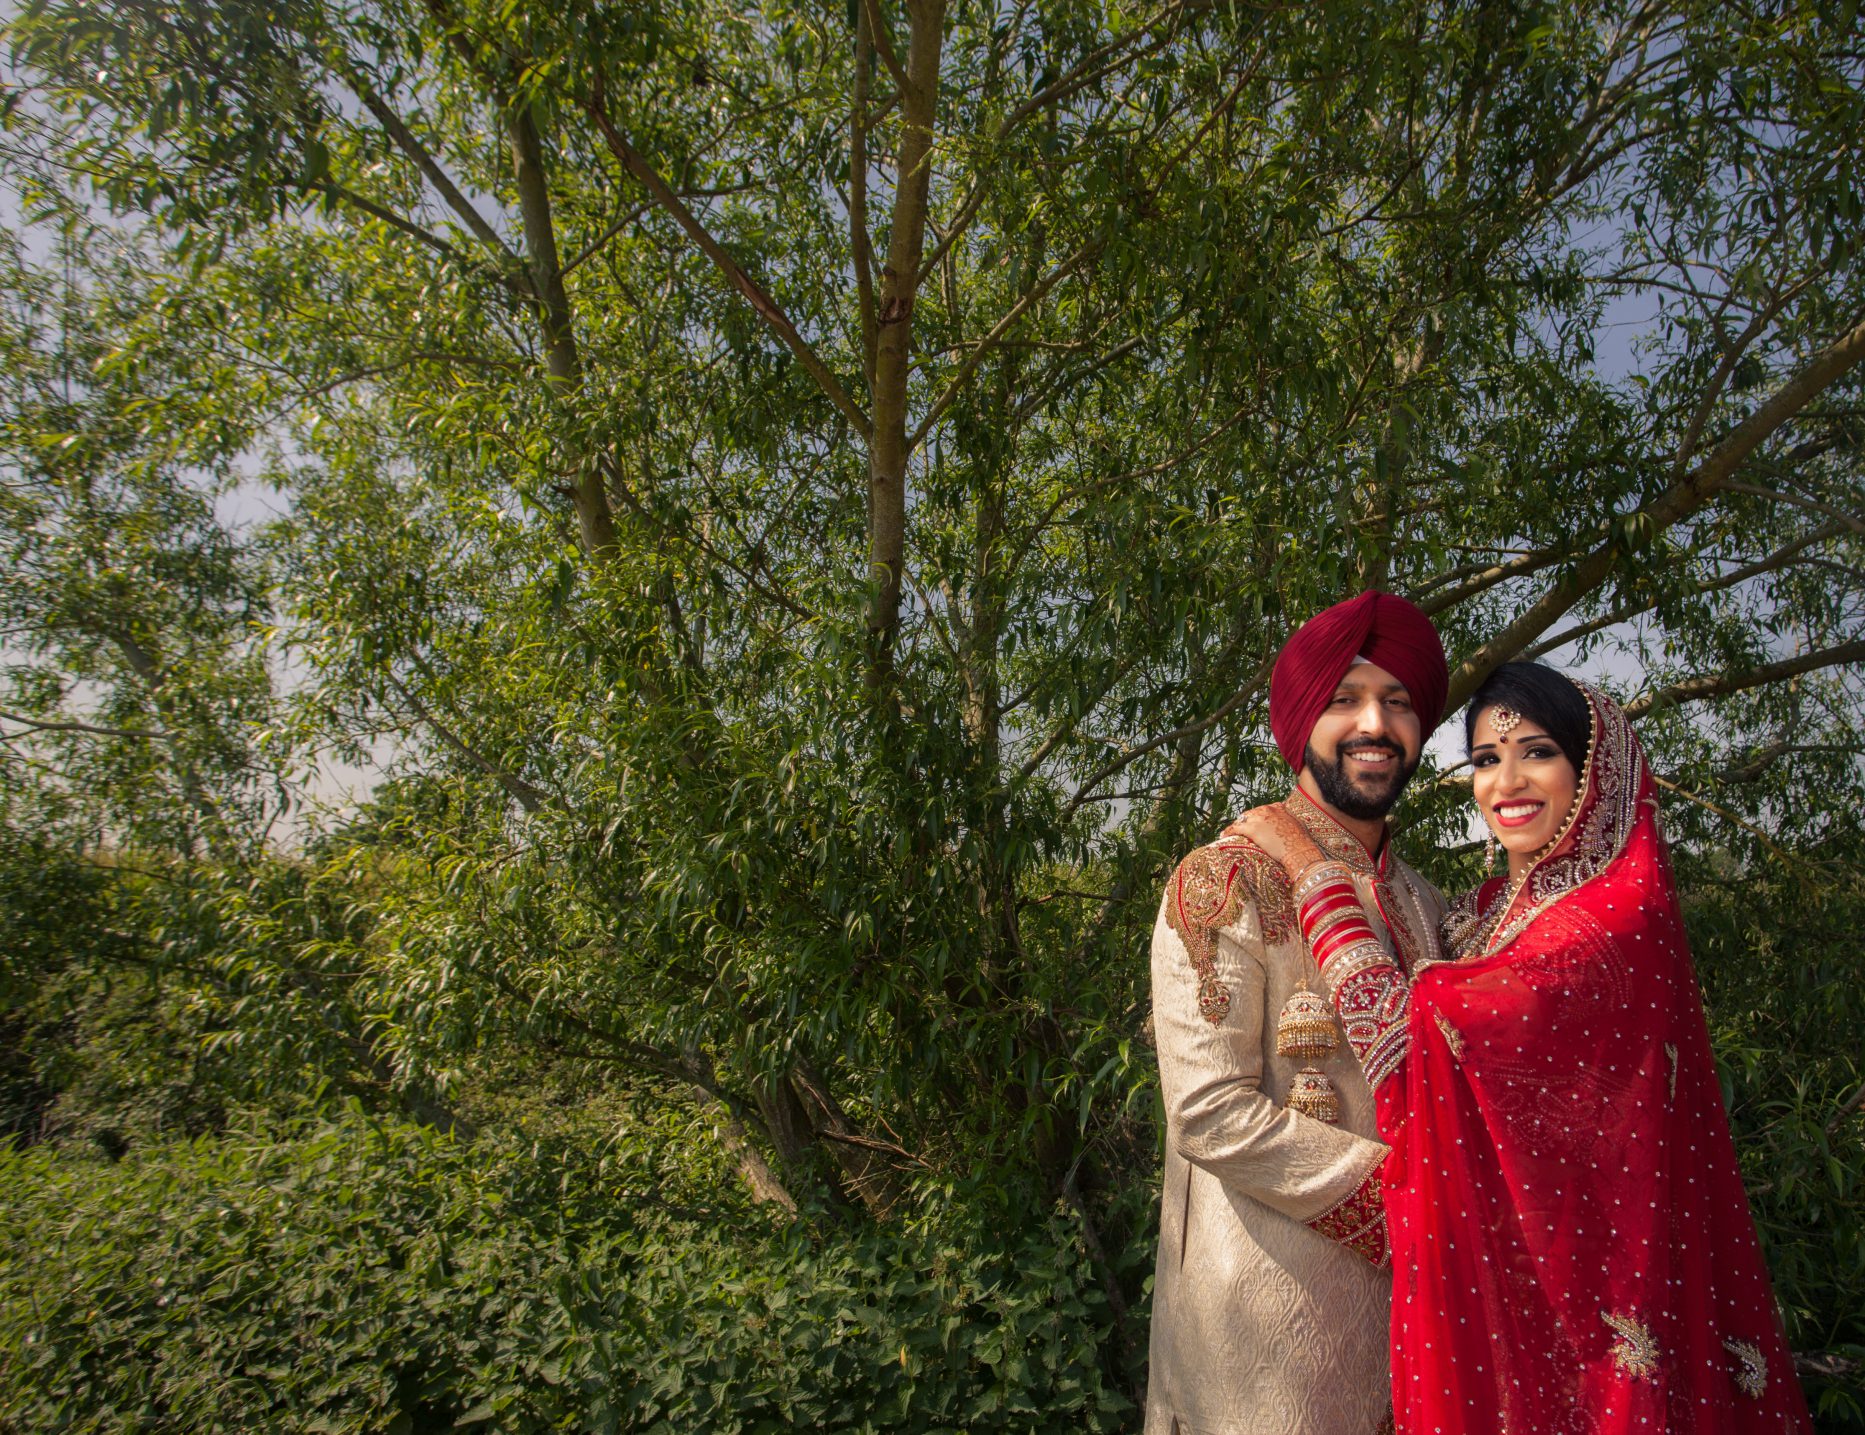 Indian wedding photography and videography packages